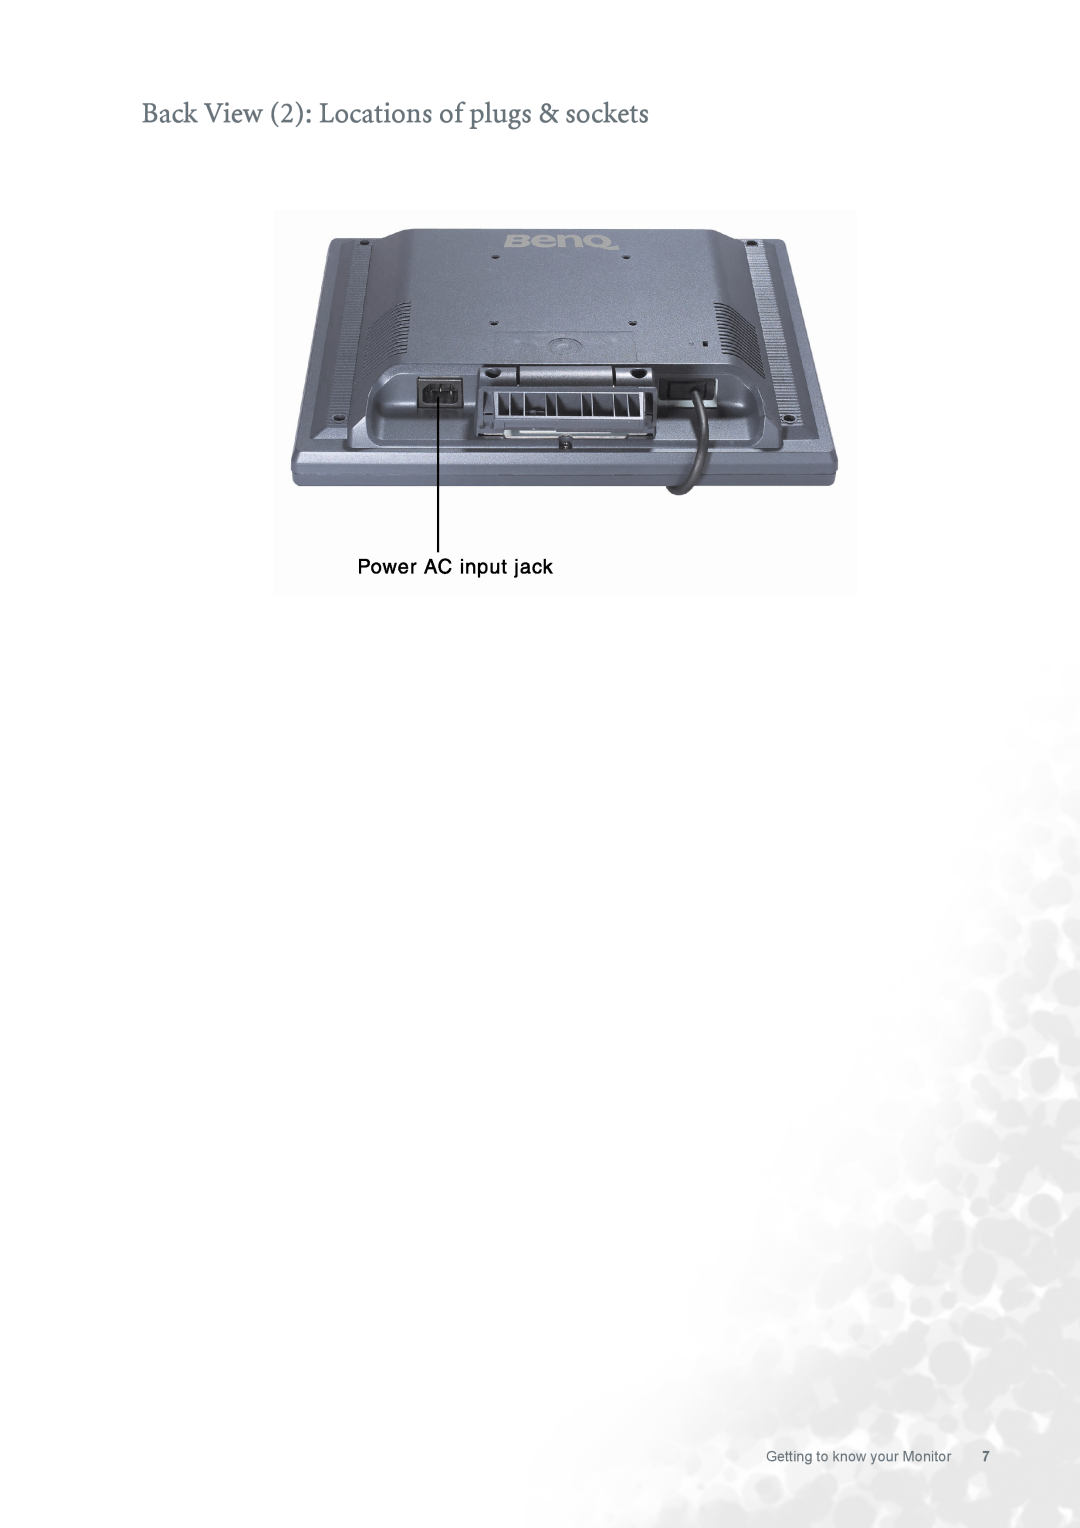 BenQ FP731 user manual Back View 2 Locations of plugs & sockets, Getting to know your Monitor 